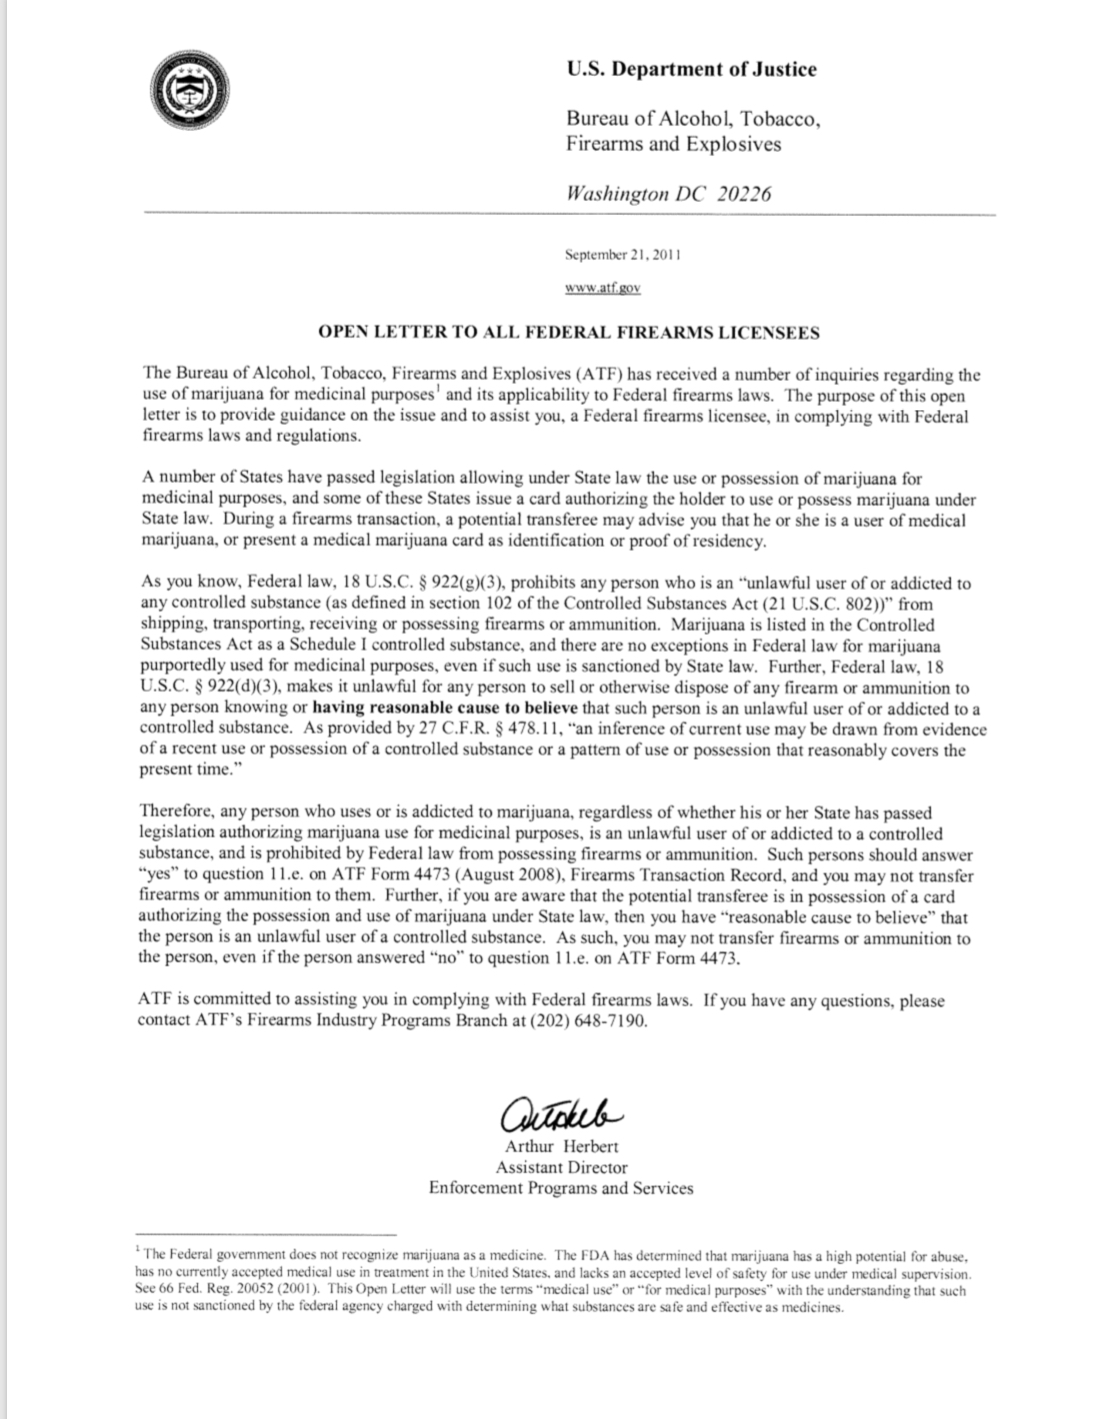 U.S. Bureau of Alcohol, Tobacco and Firearms – Open Letter to all Federal Firearms Licenses